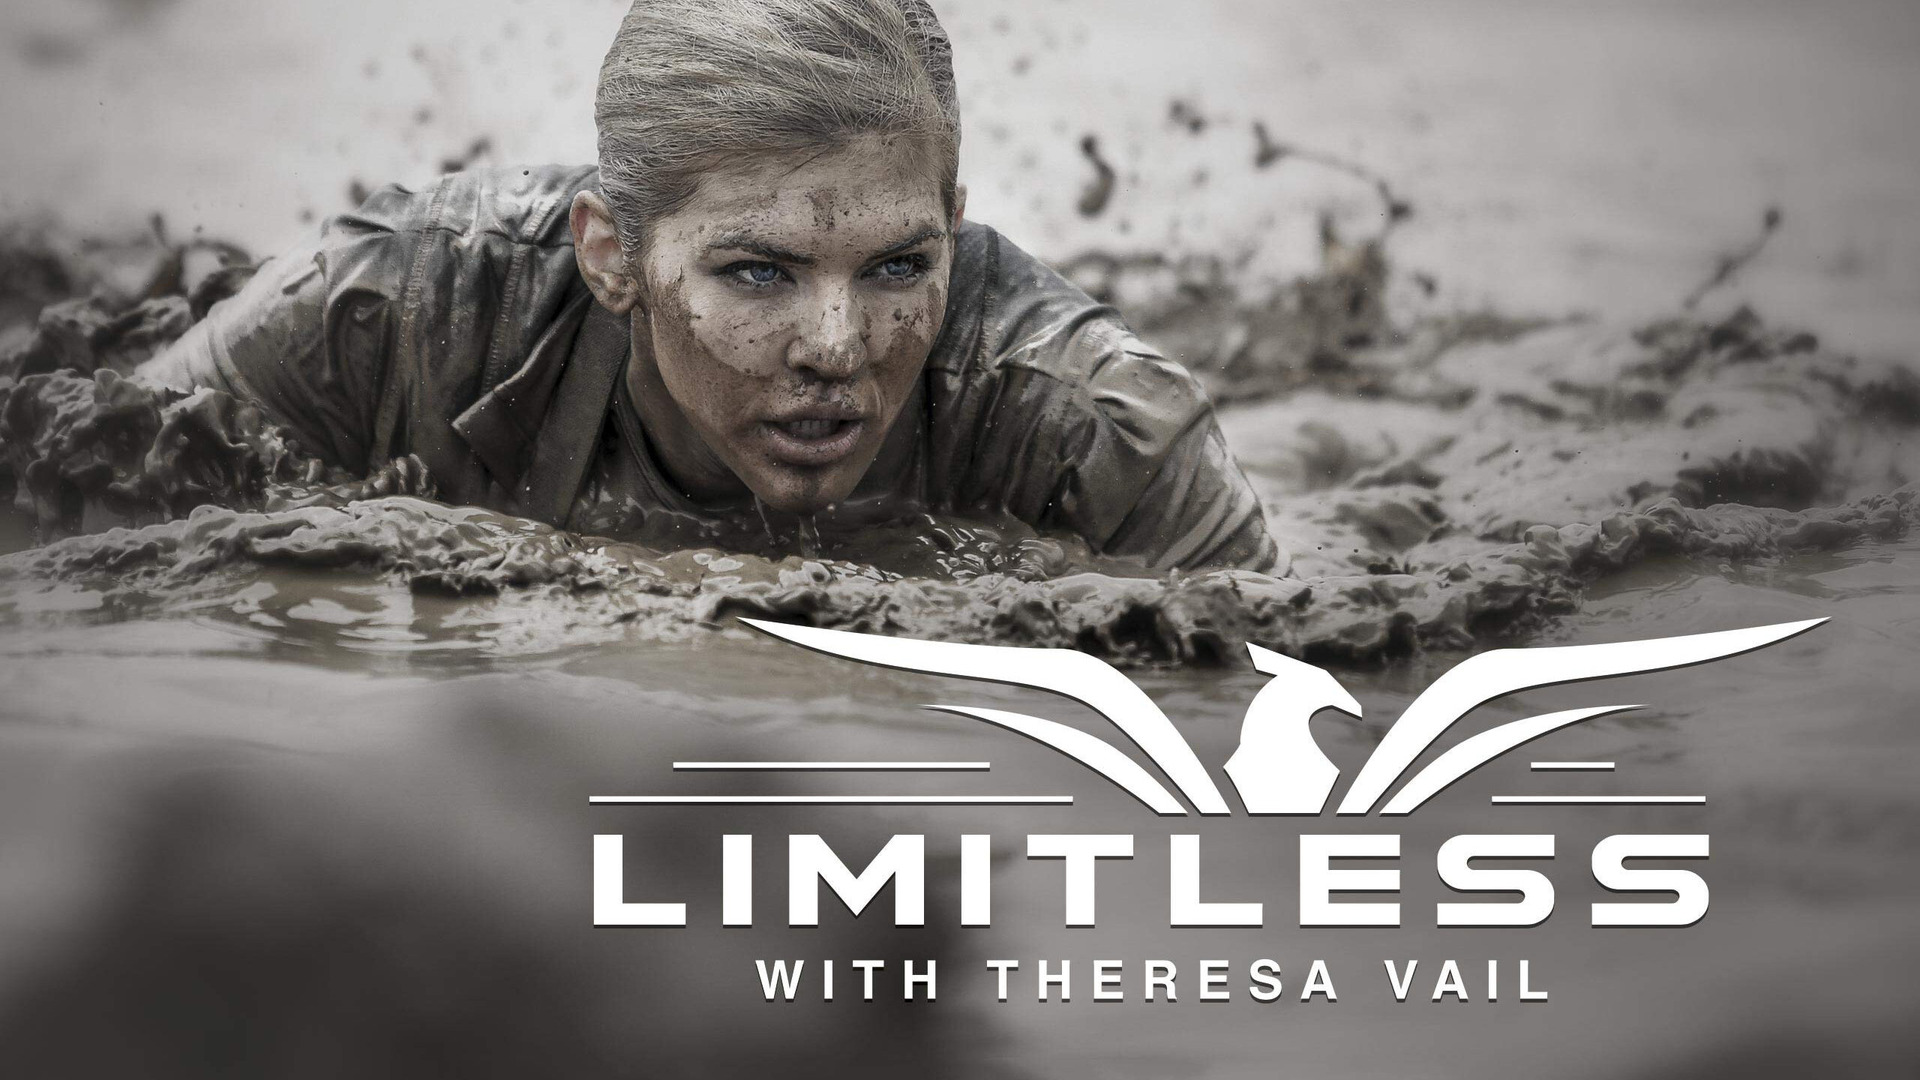 Show Limitless with Theresa Vail